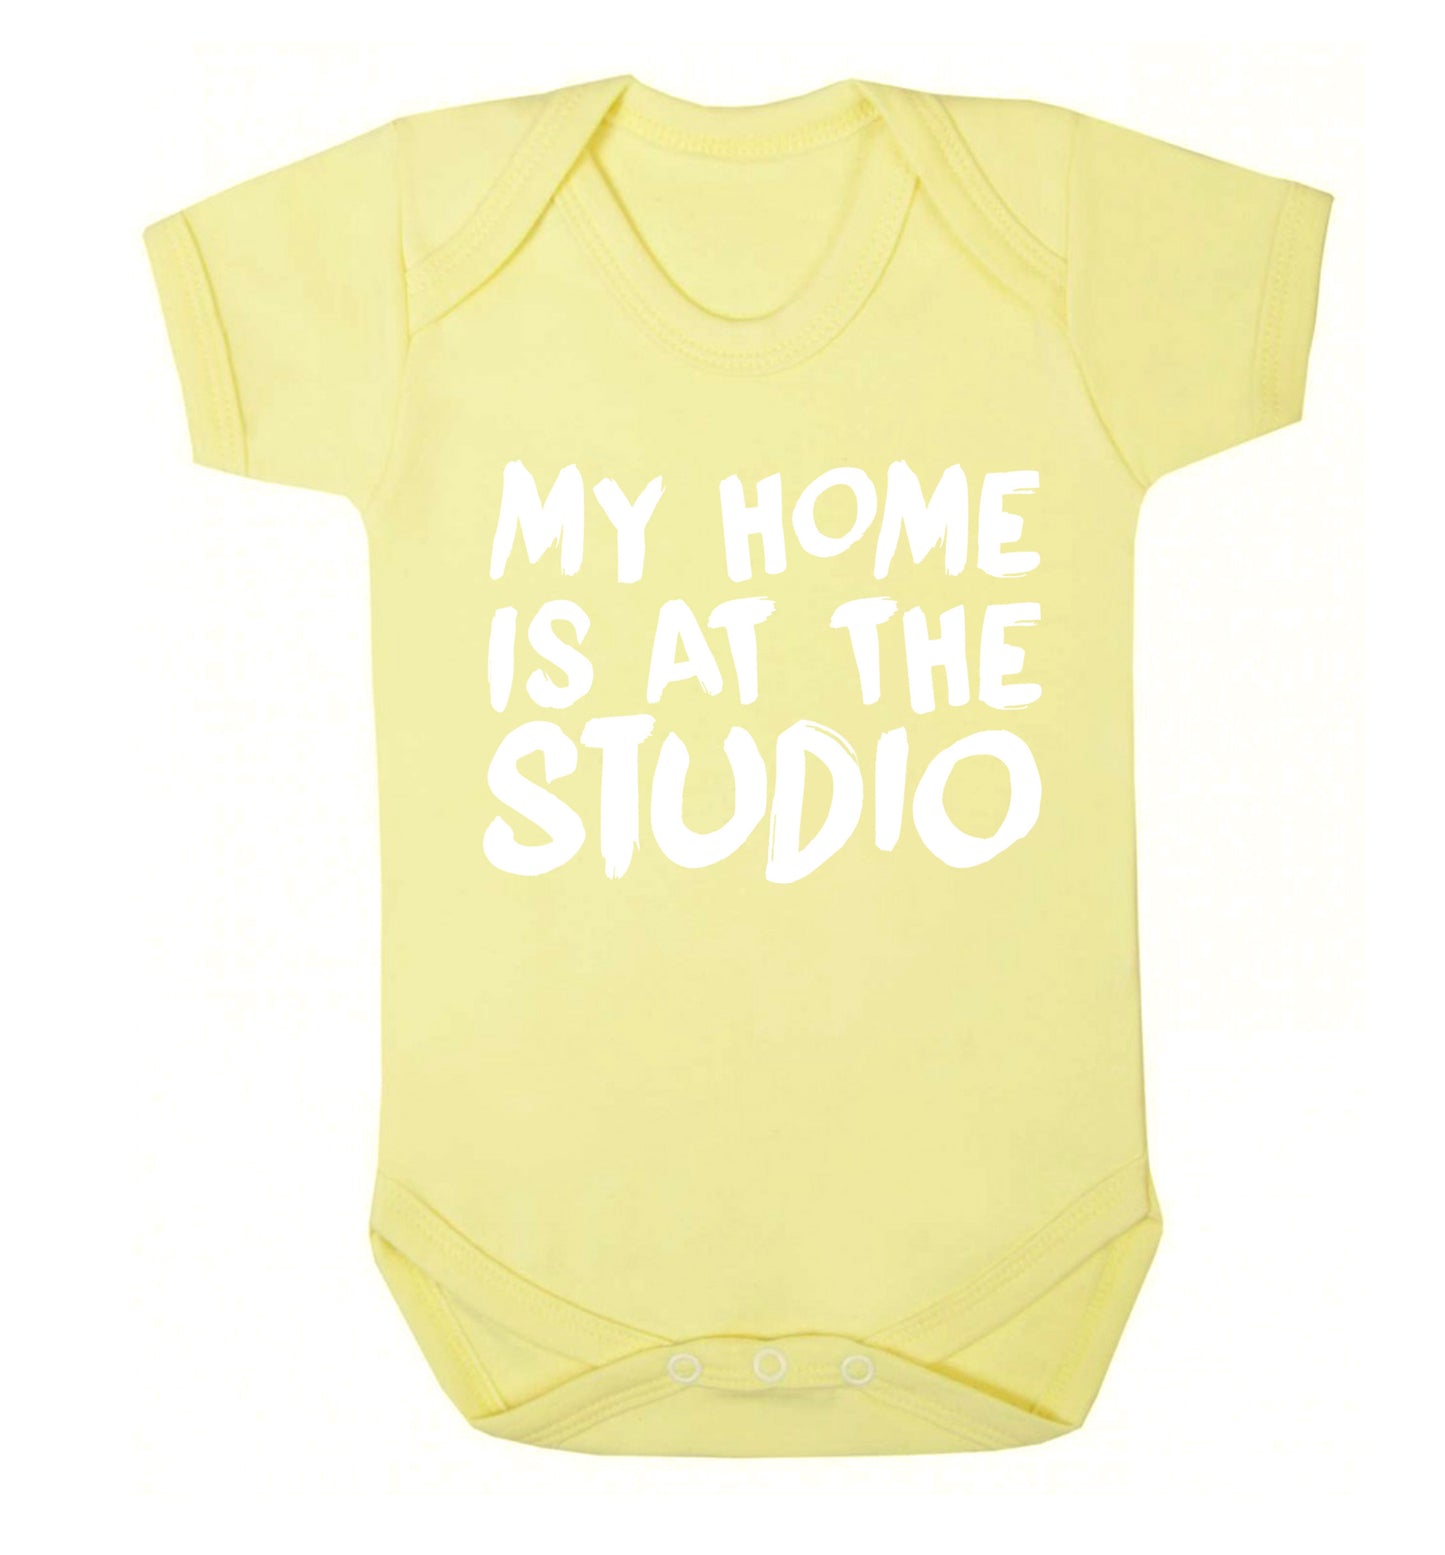 My home is at the studio Baby Vest pale yellow 18-24 months